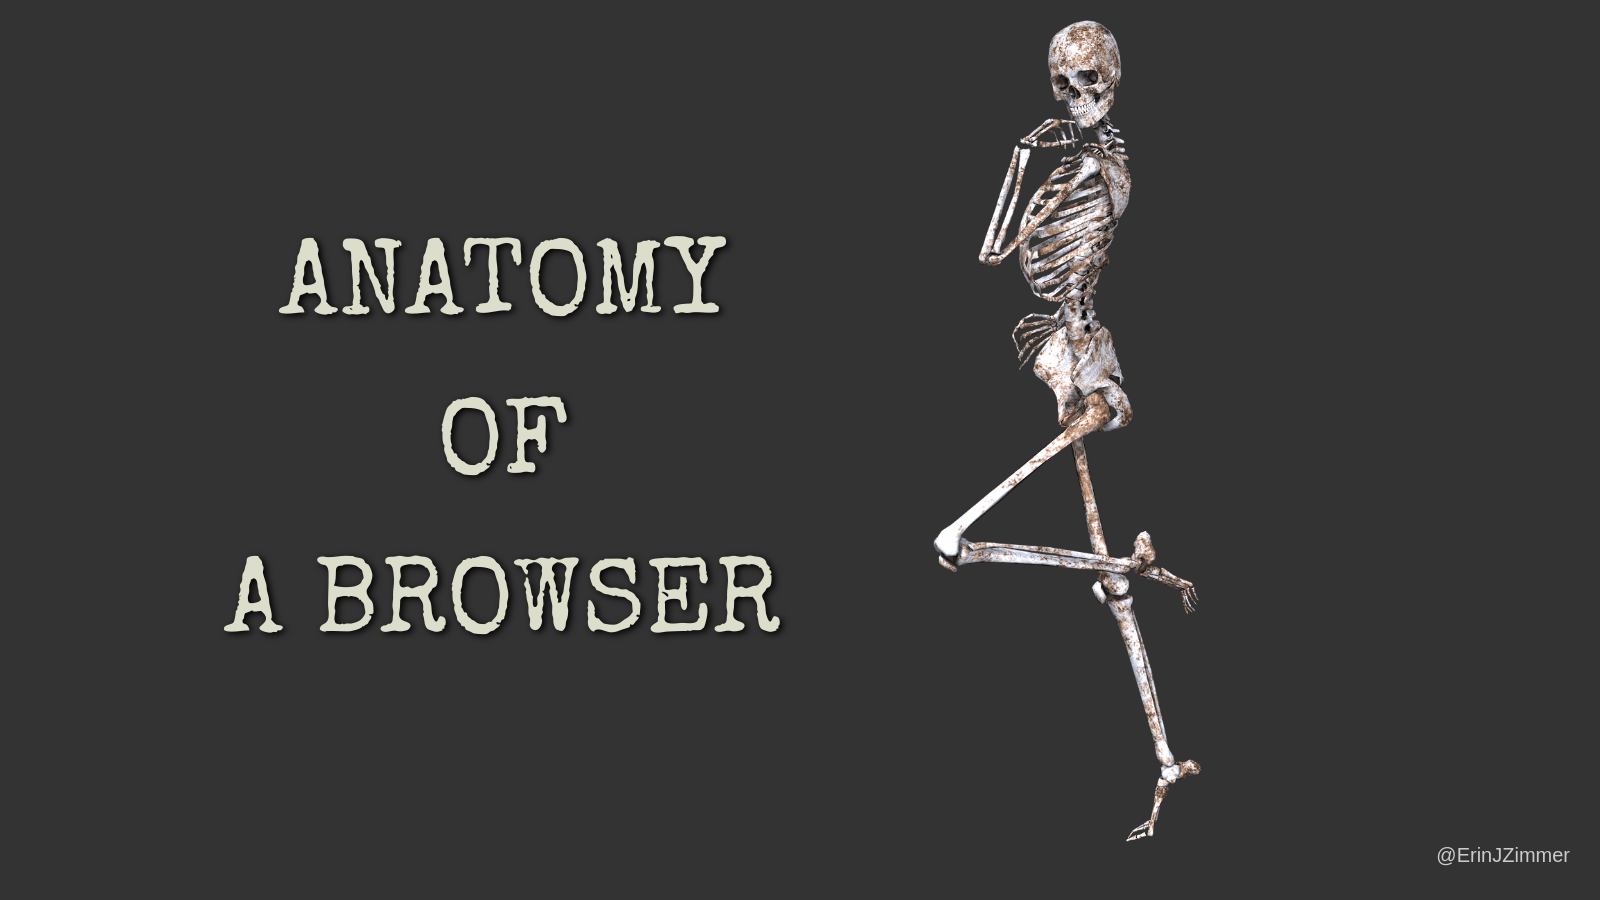 Autopsy of a browser